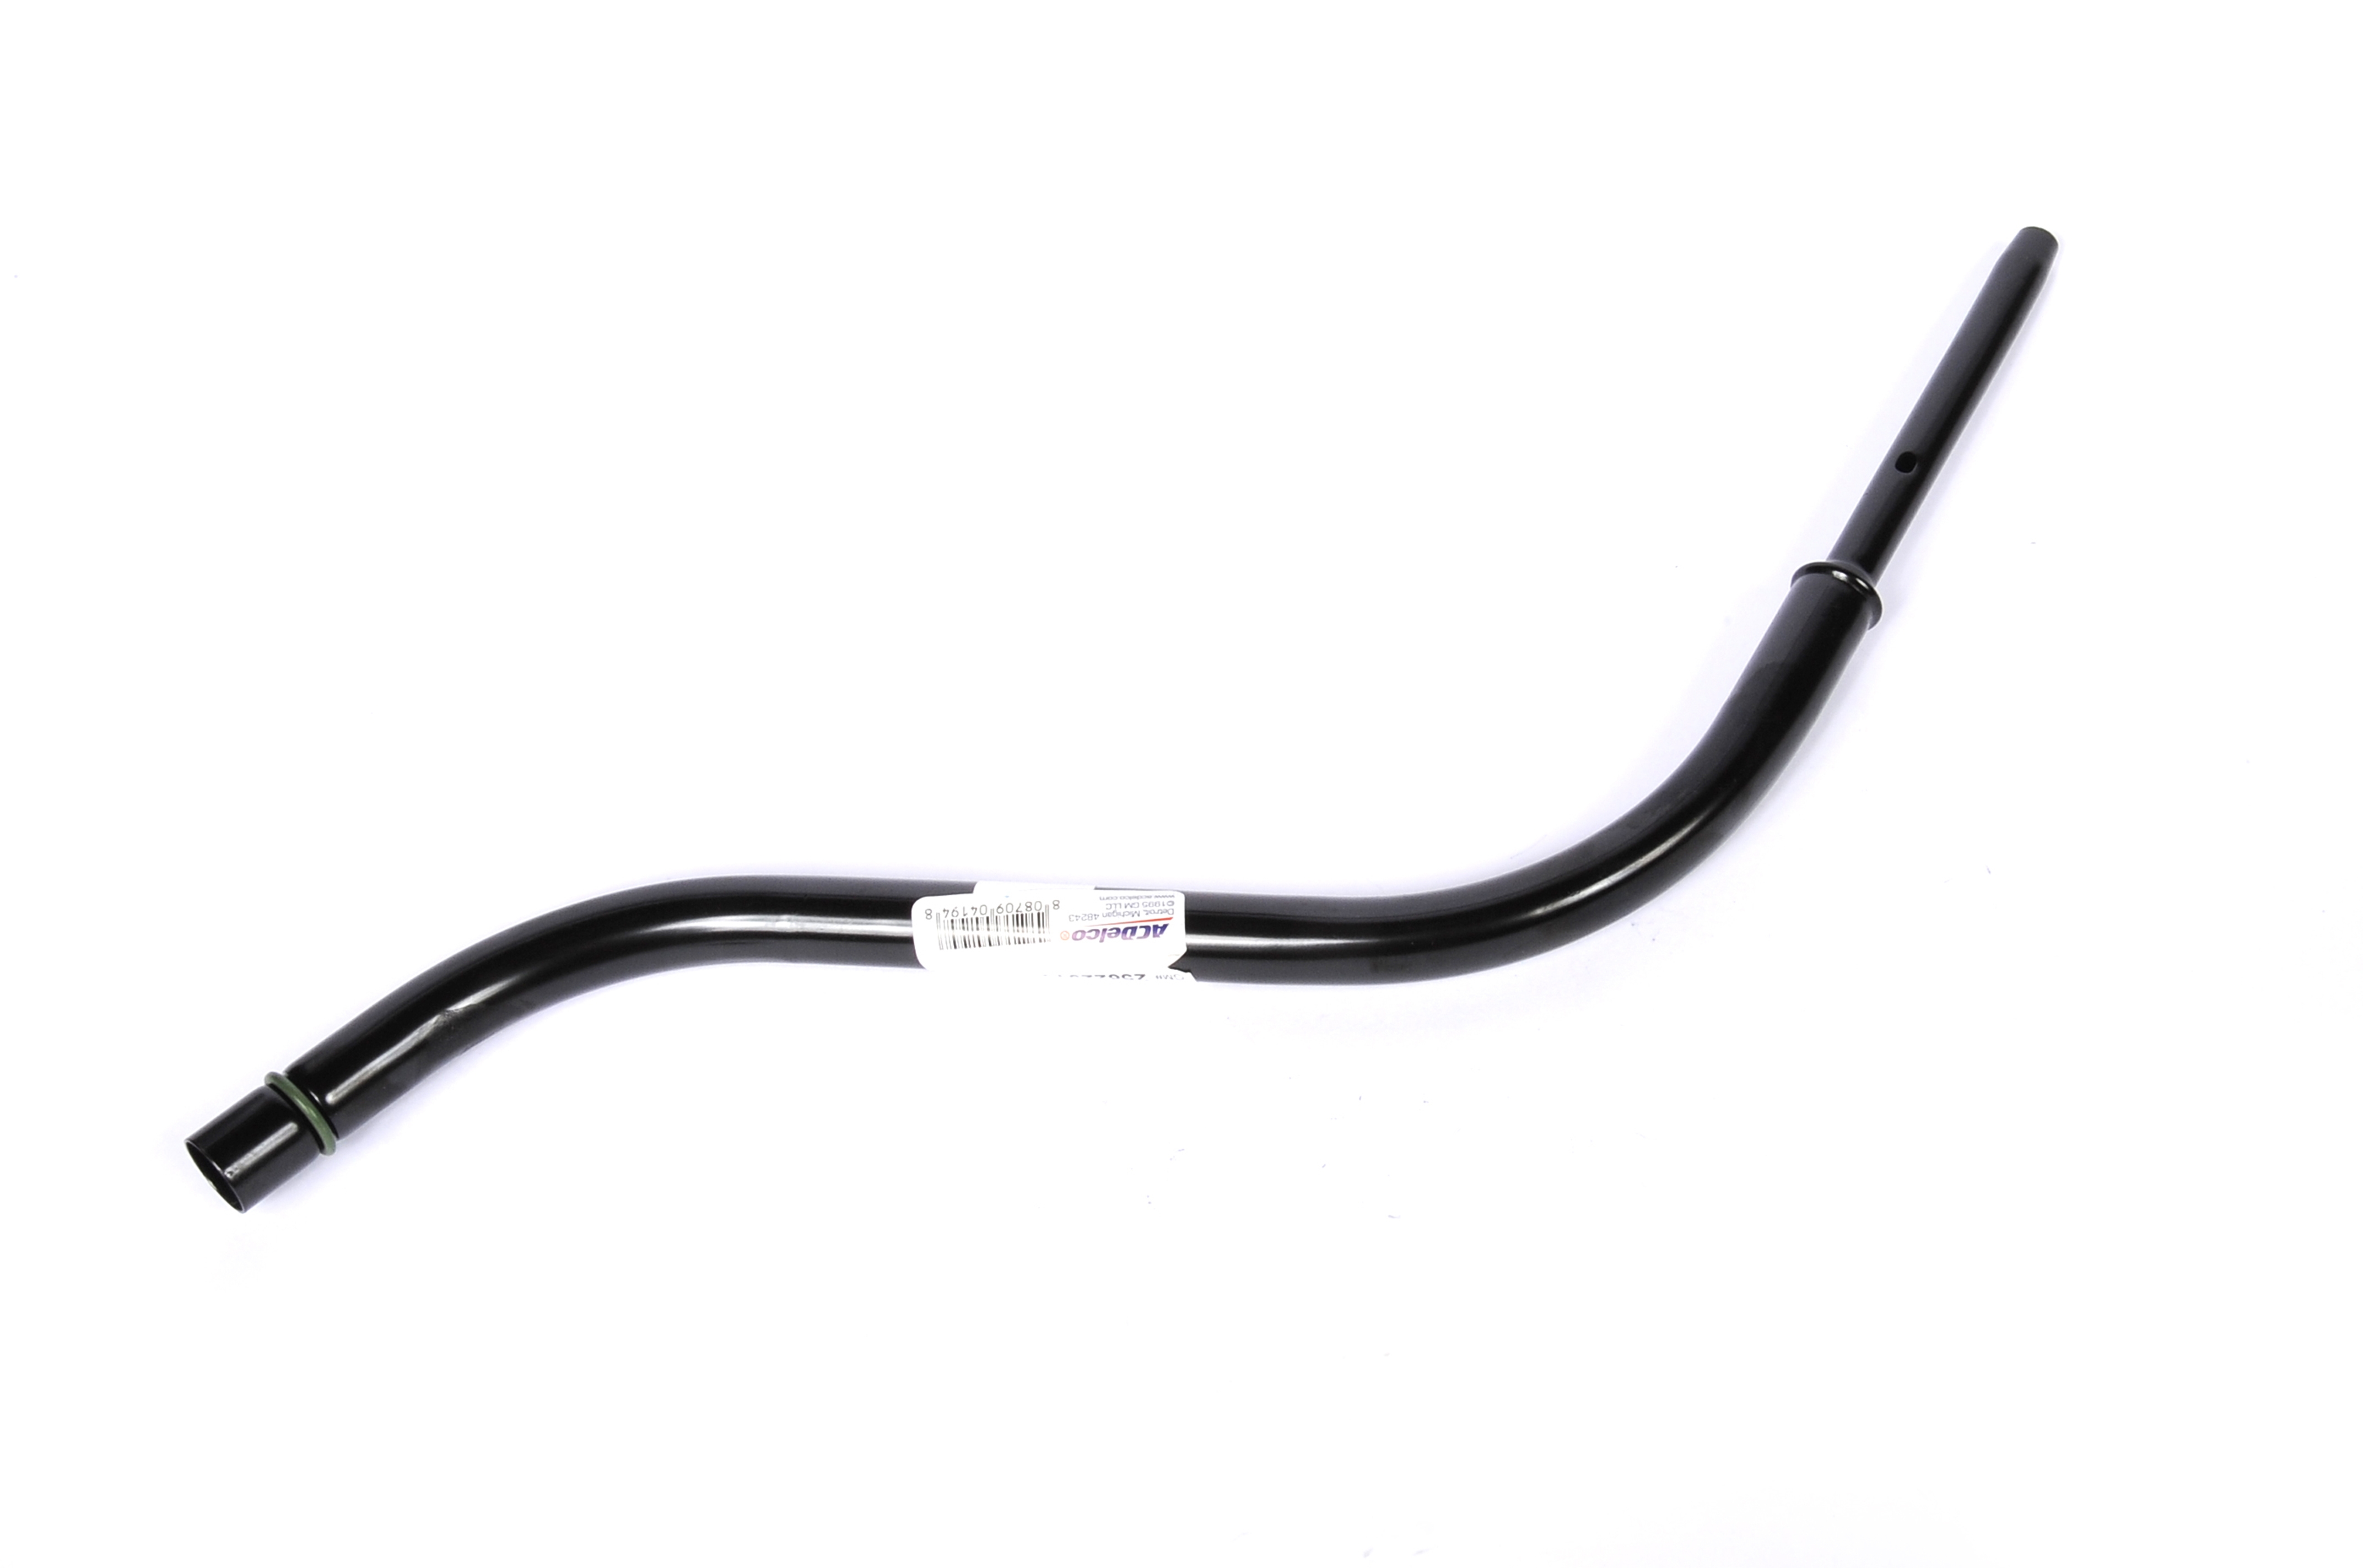 GM GENUINE PARTS - Automatic Transmission Fluid Filler Tube (Lower) - GMP 25822914